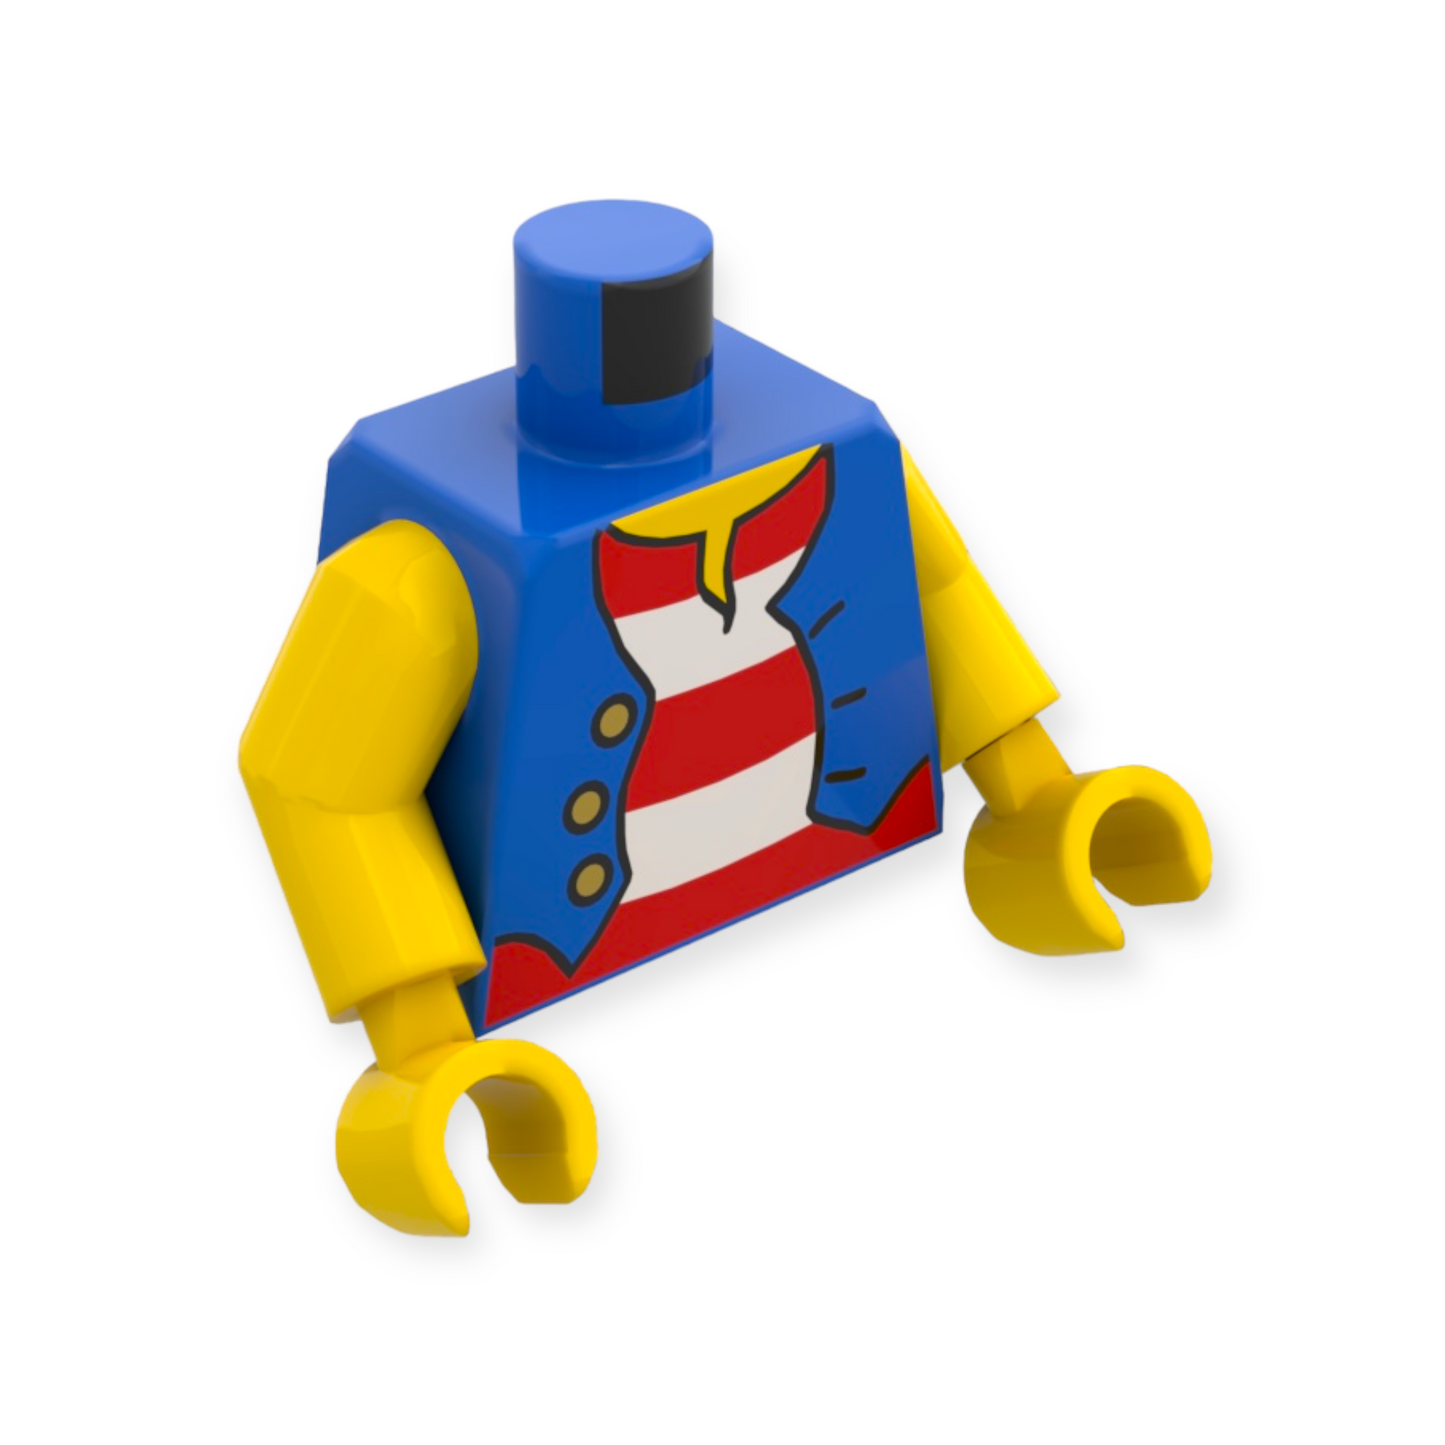 LEGO Torso - 9336 Pirate Vest Open with Gold Buttons over Shirt with Red and White Horizontal Stripes